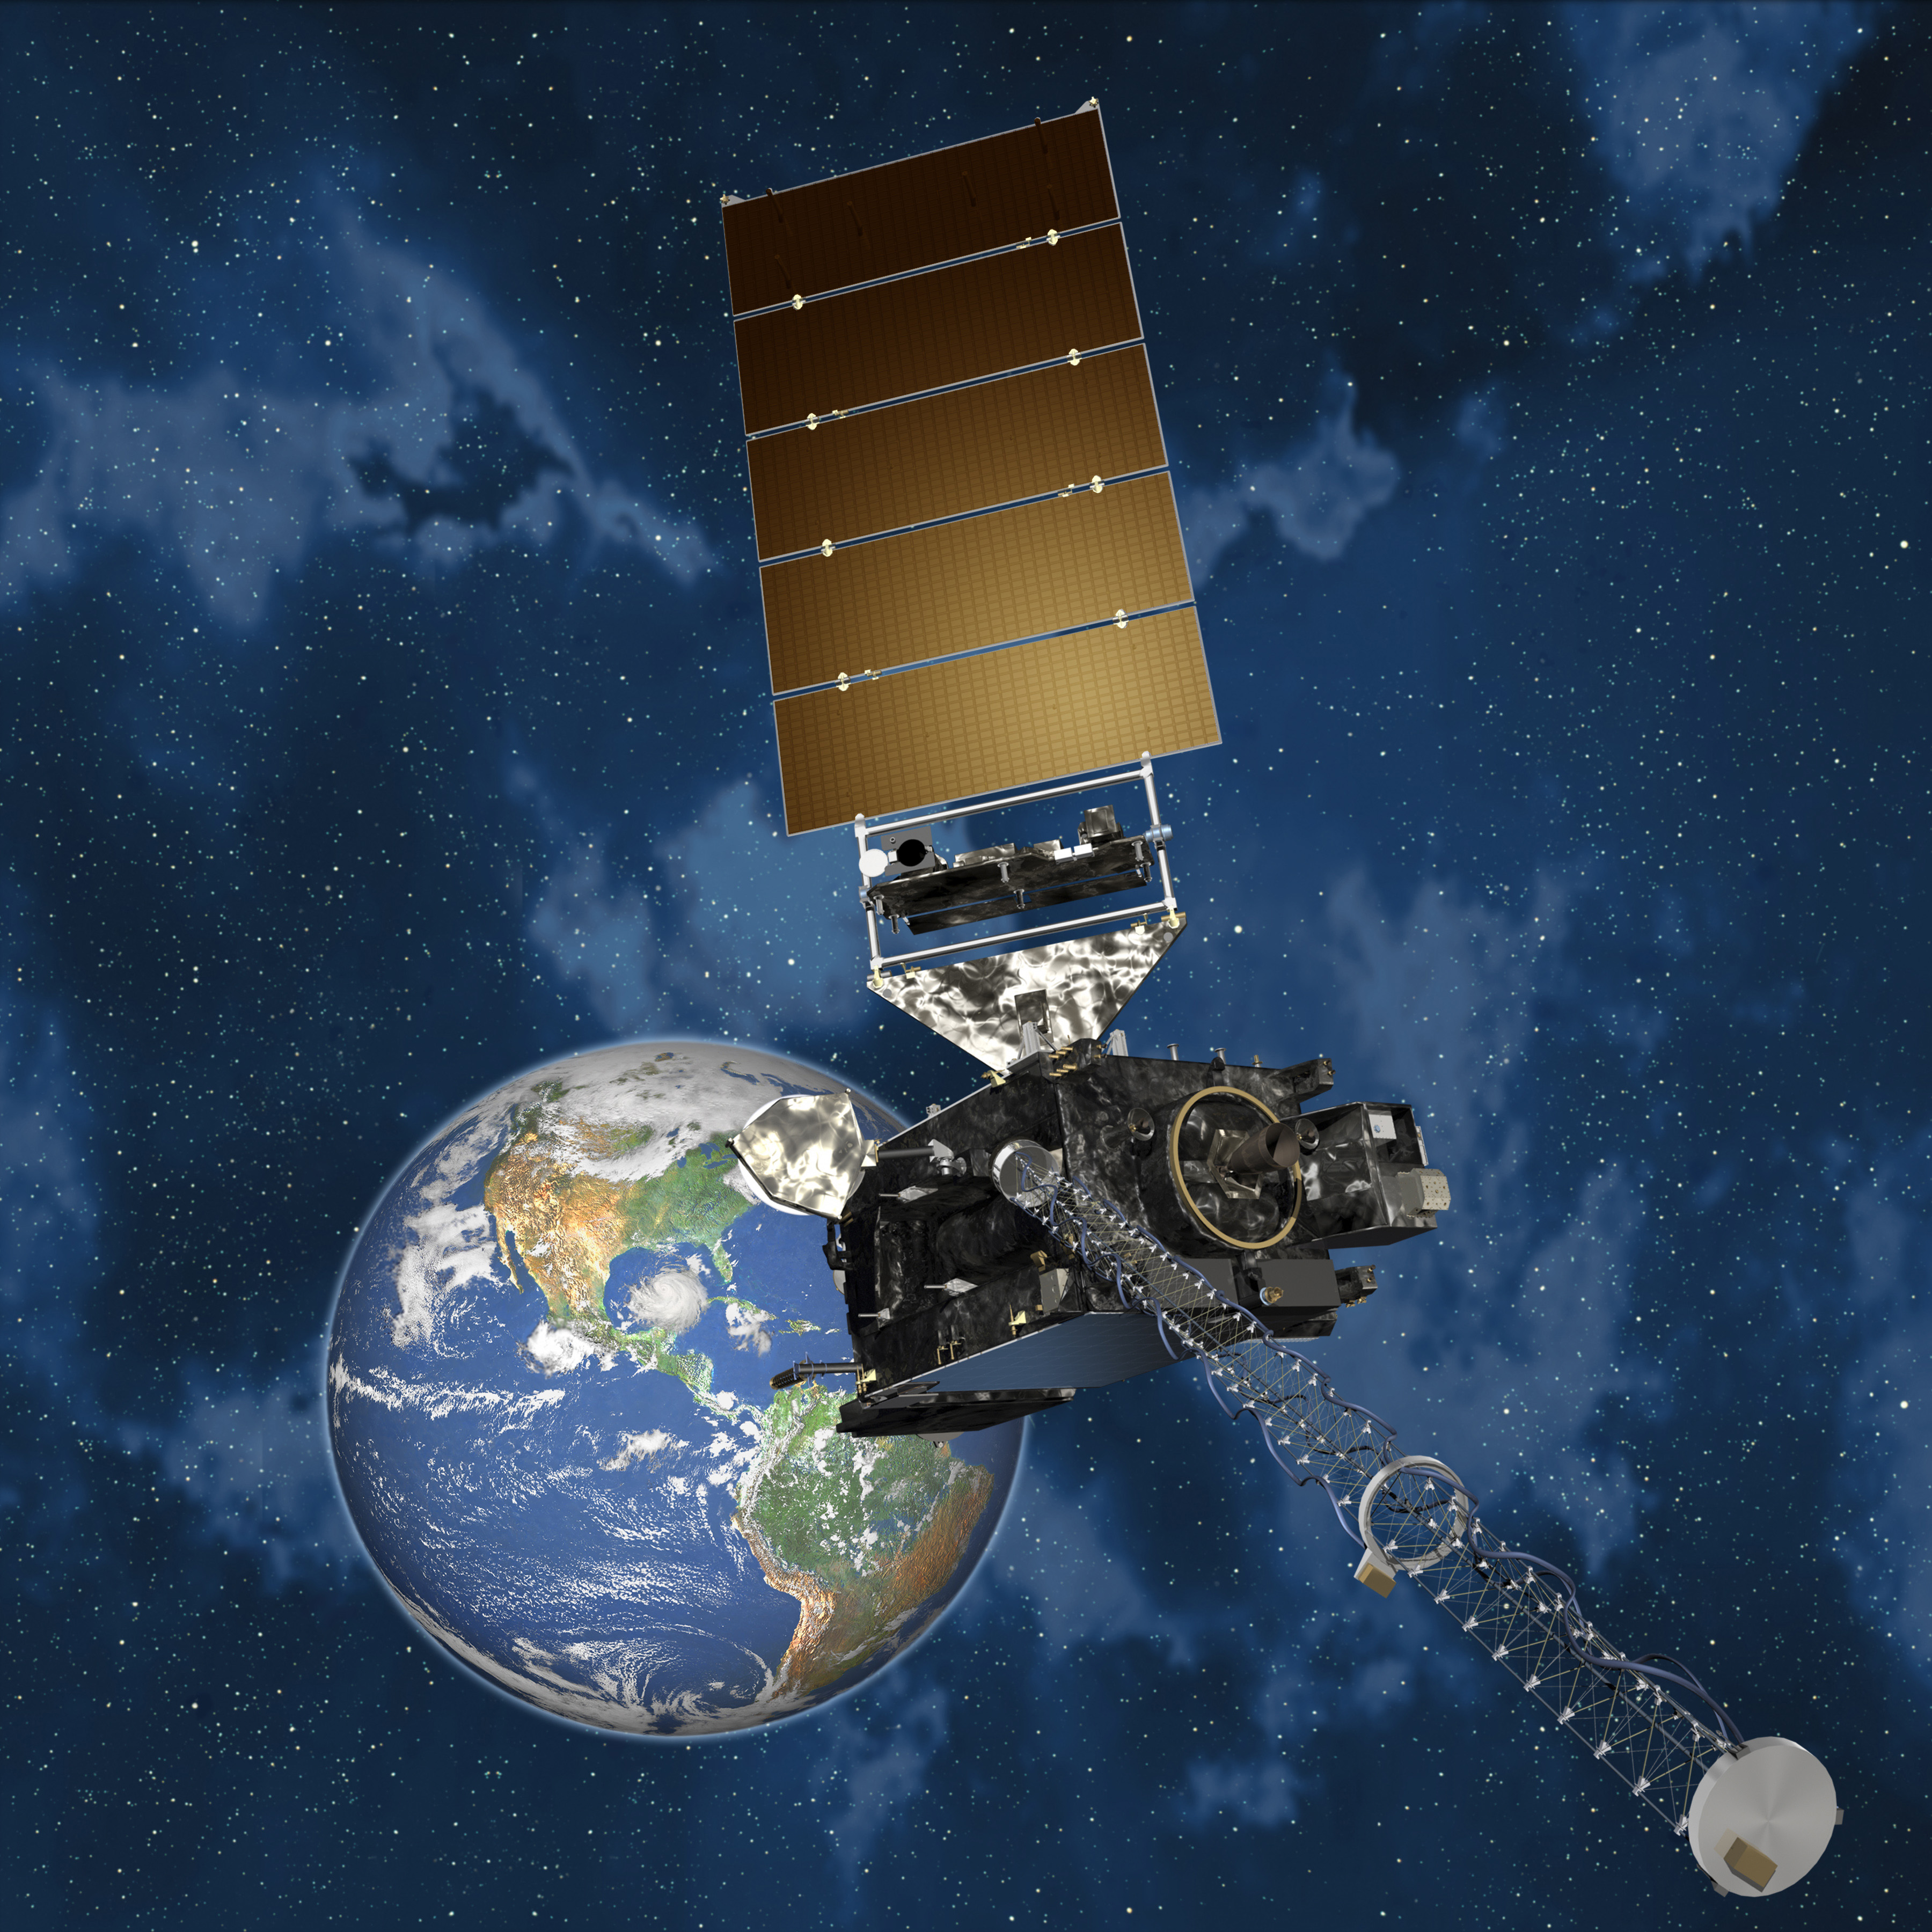 Image of the GOES-R satellite in space near Earth.